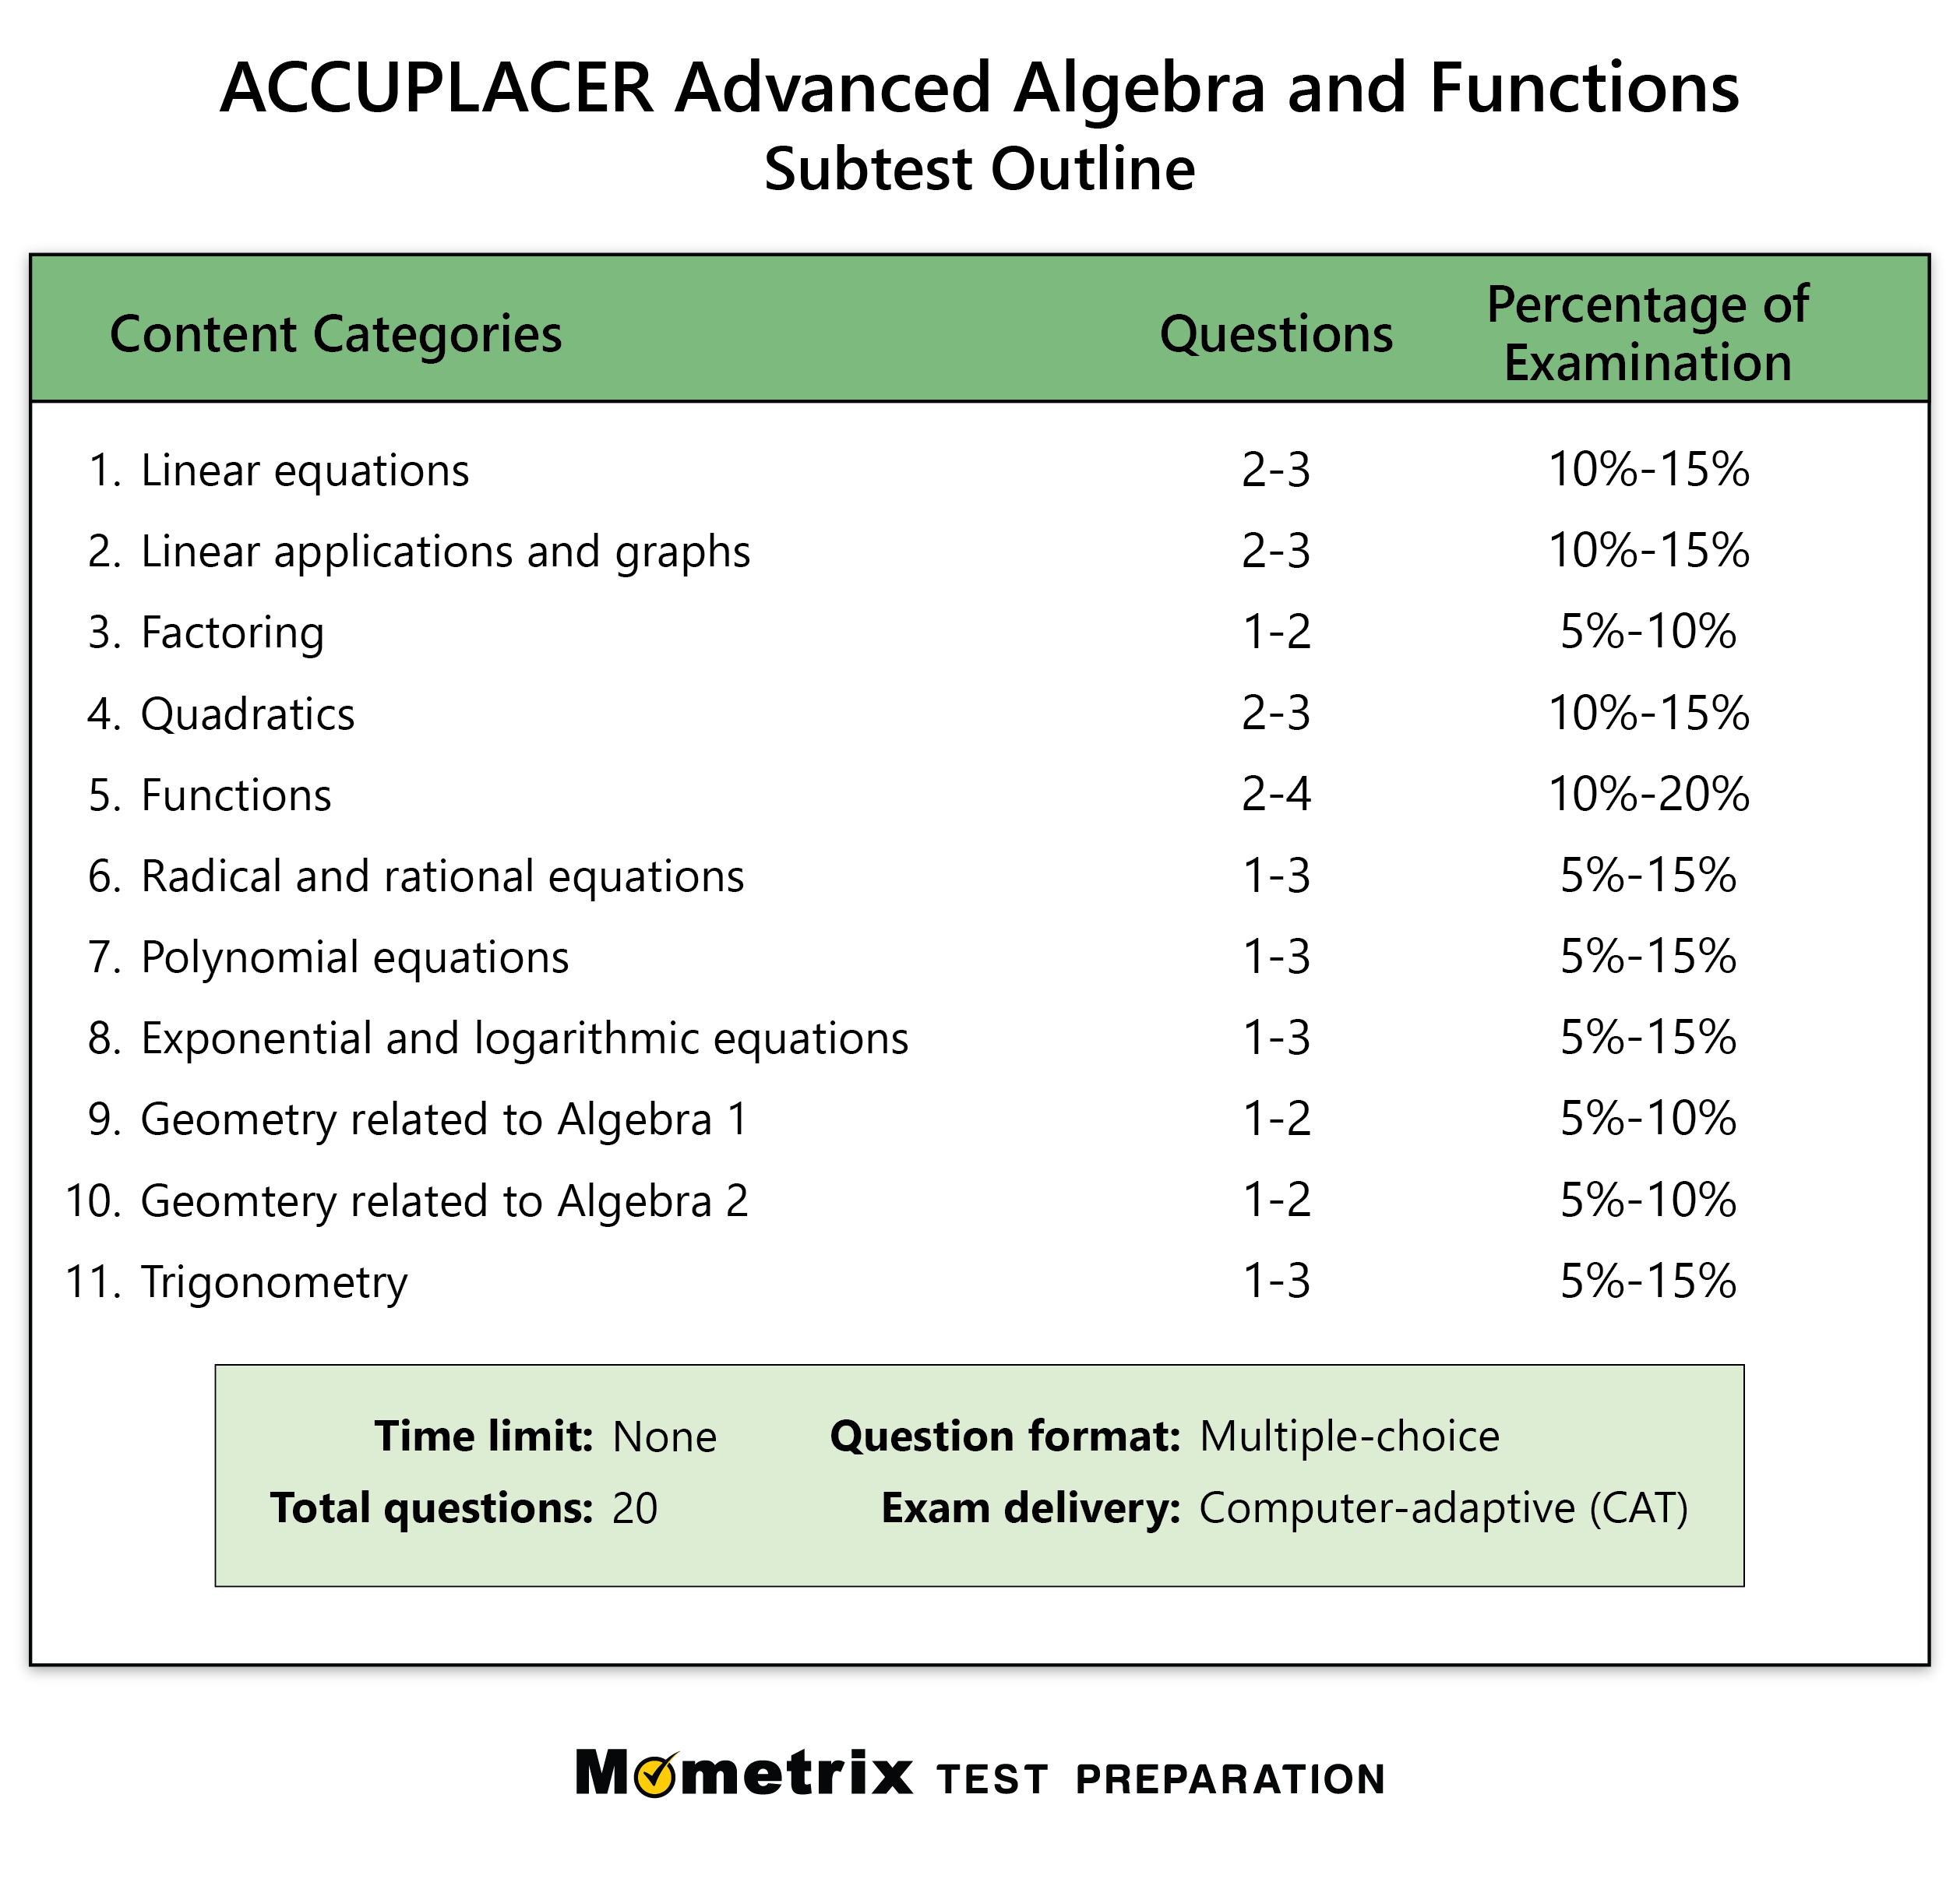 ACCUPLACER Advanced Algebra and Functions Practice Test